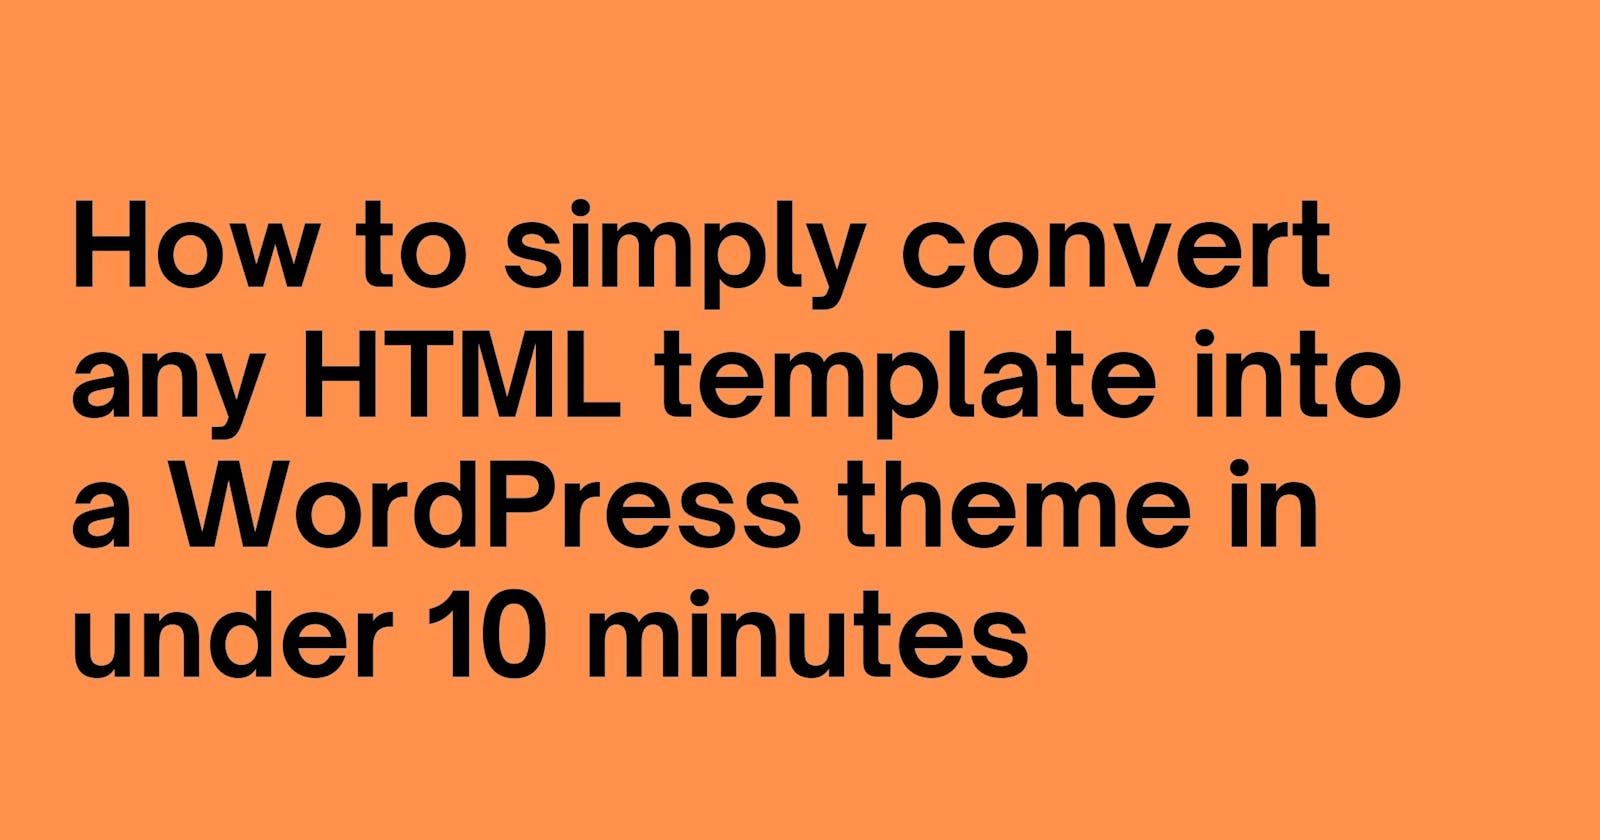 How to simply convert any HTML template into a WordPress theme in under 10 minutes